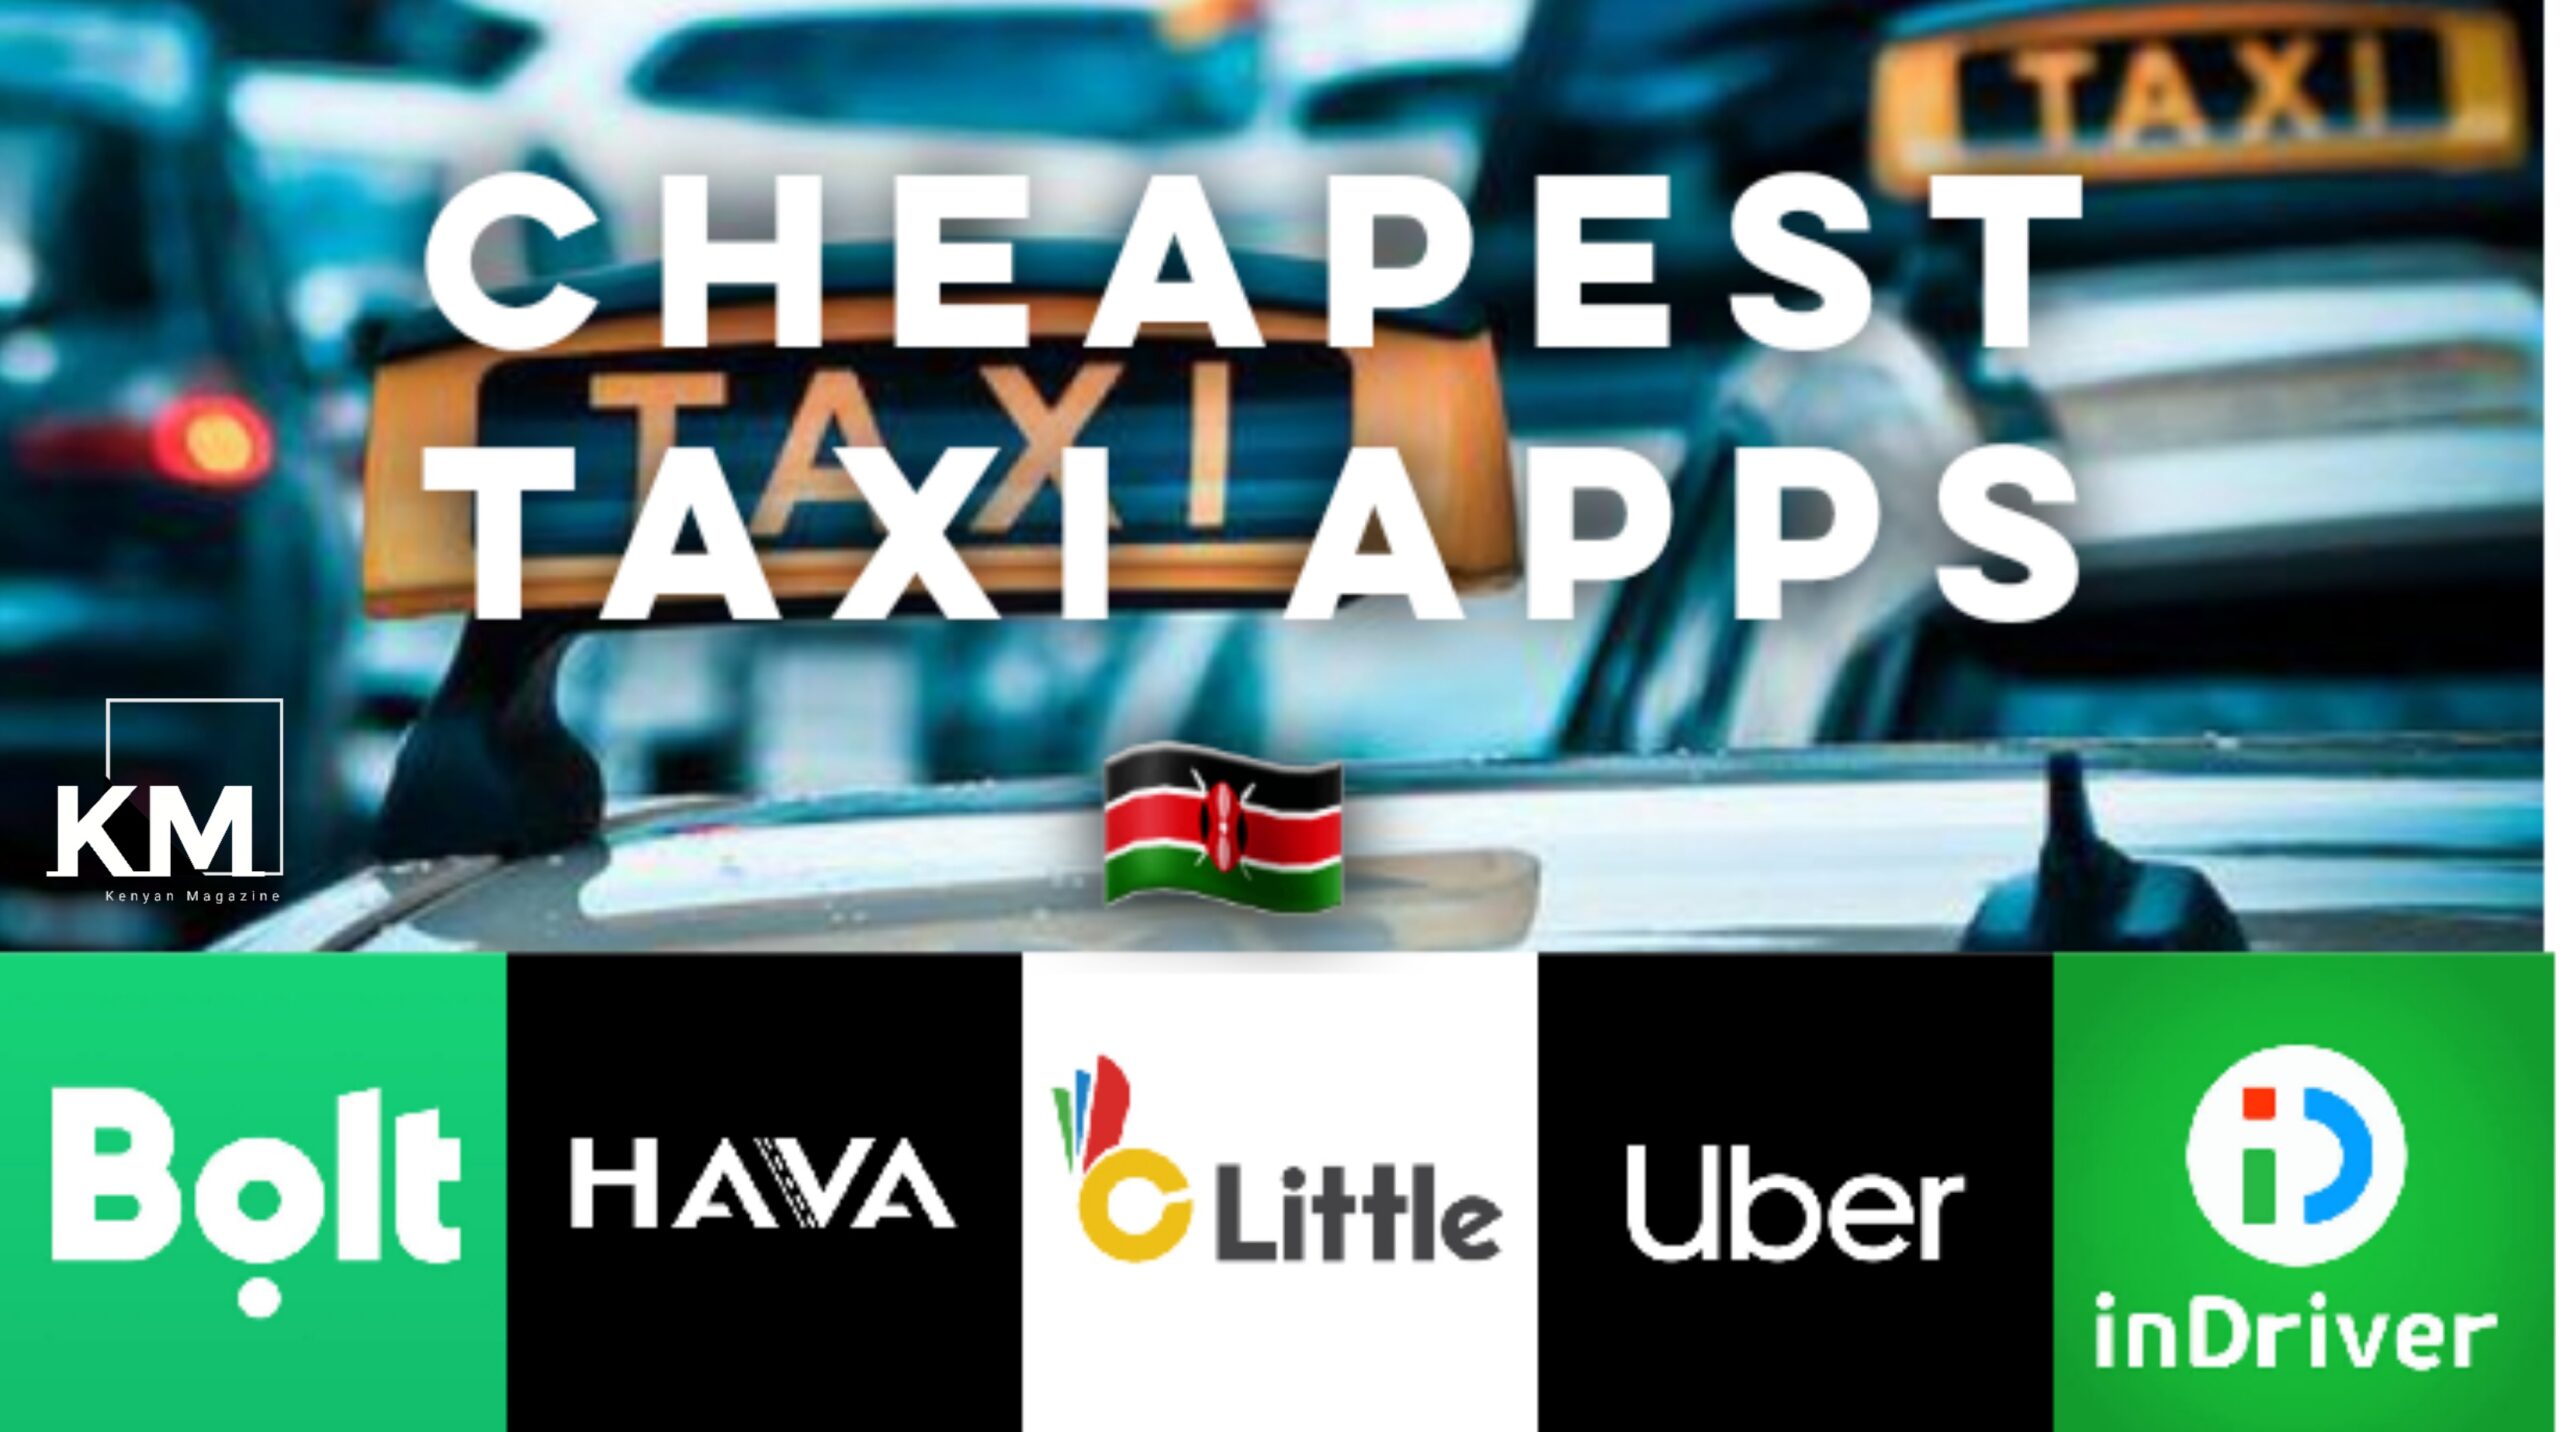 Cheap taxi apps in Kenya